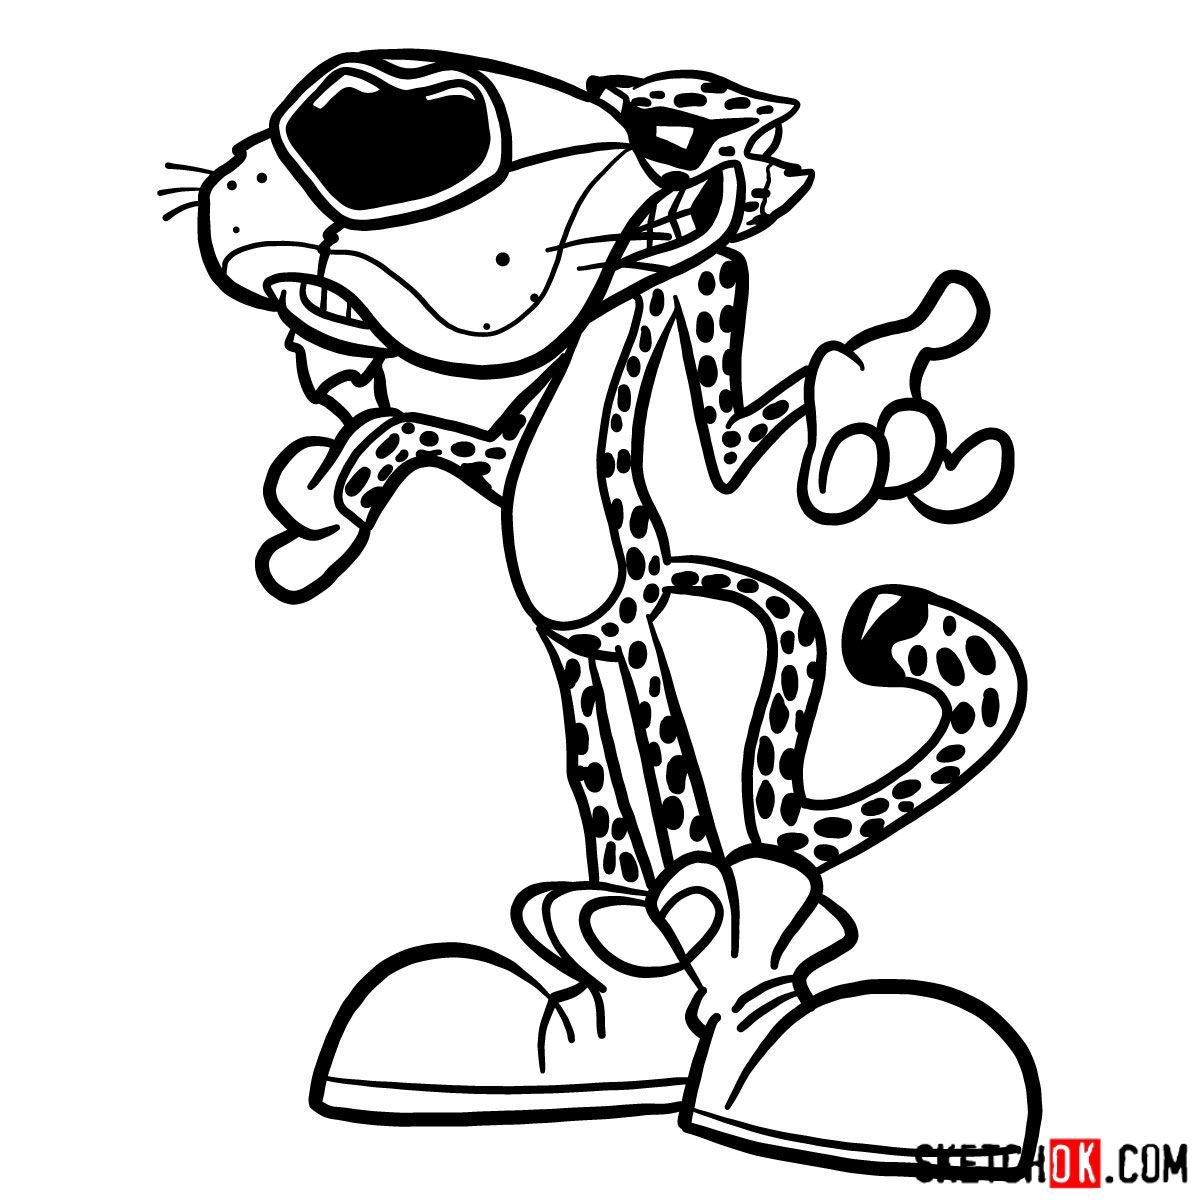 How to draw Chester Cheetah - SketchOk ...